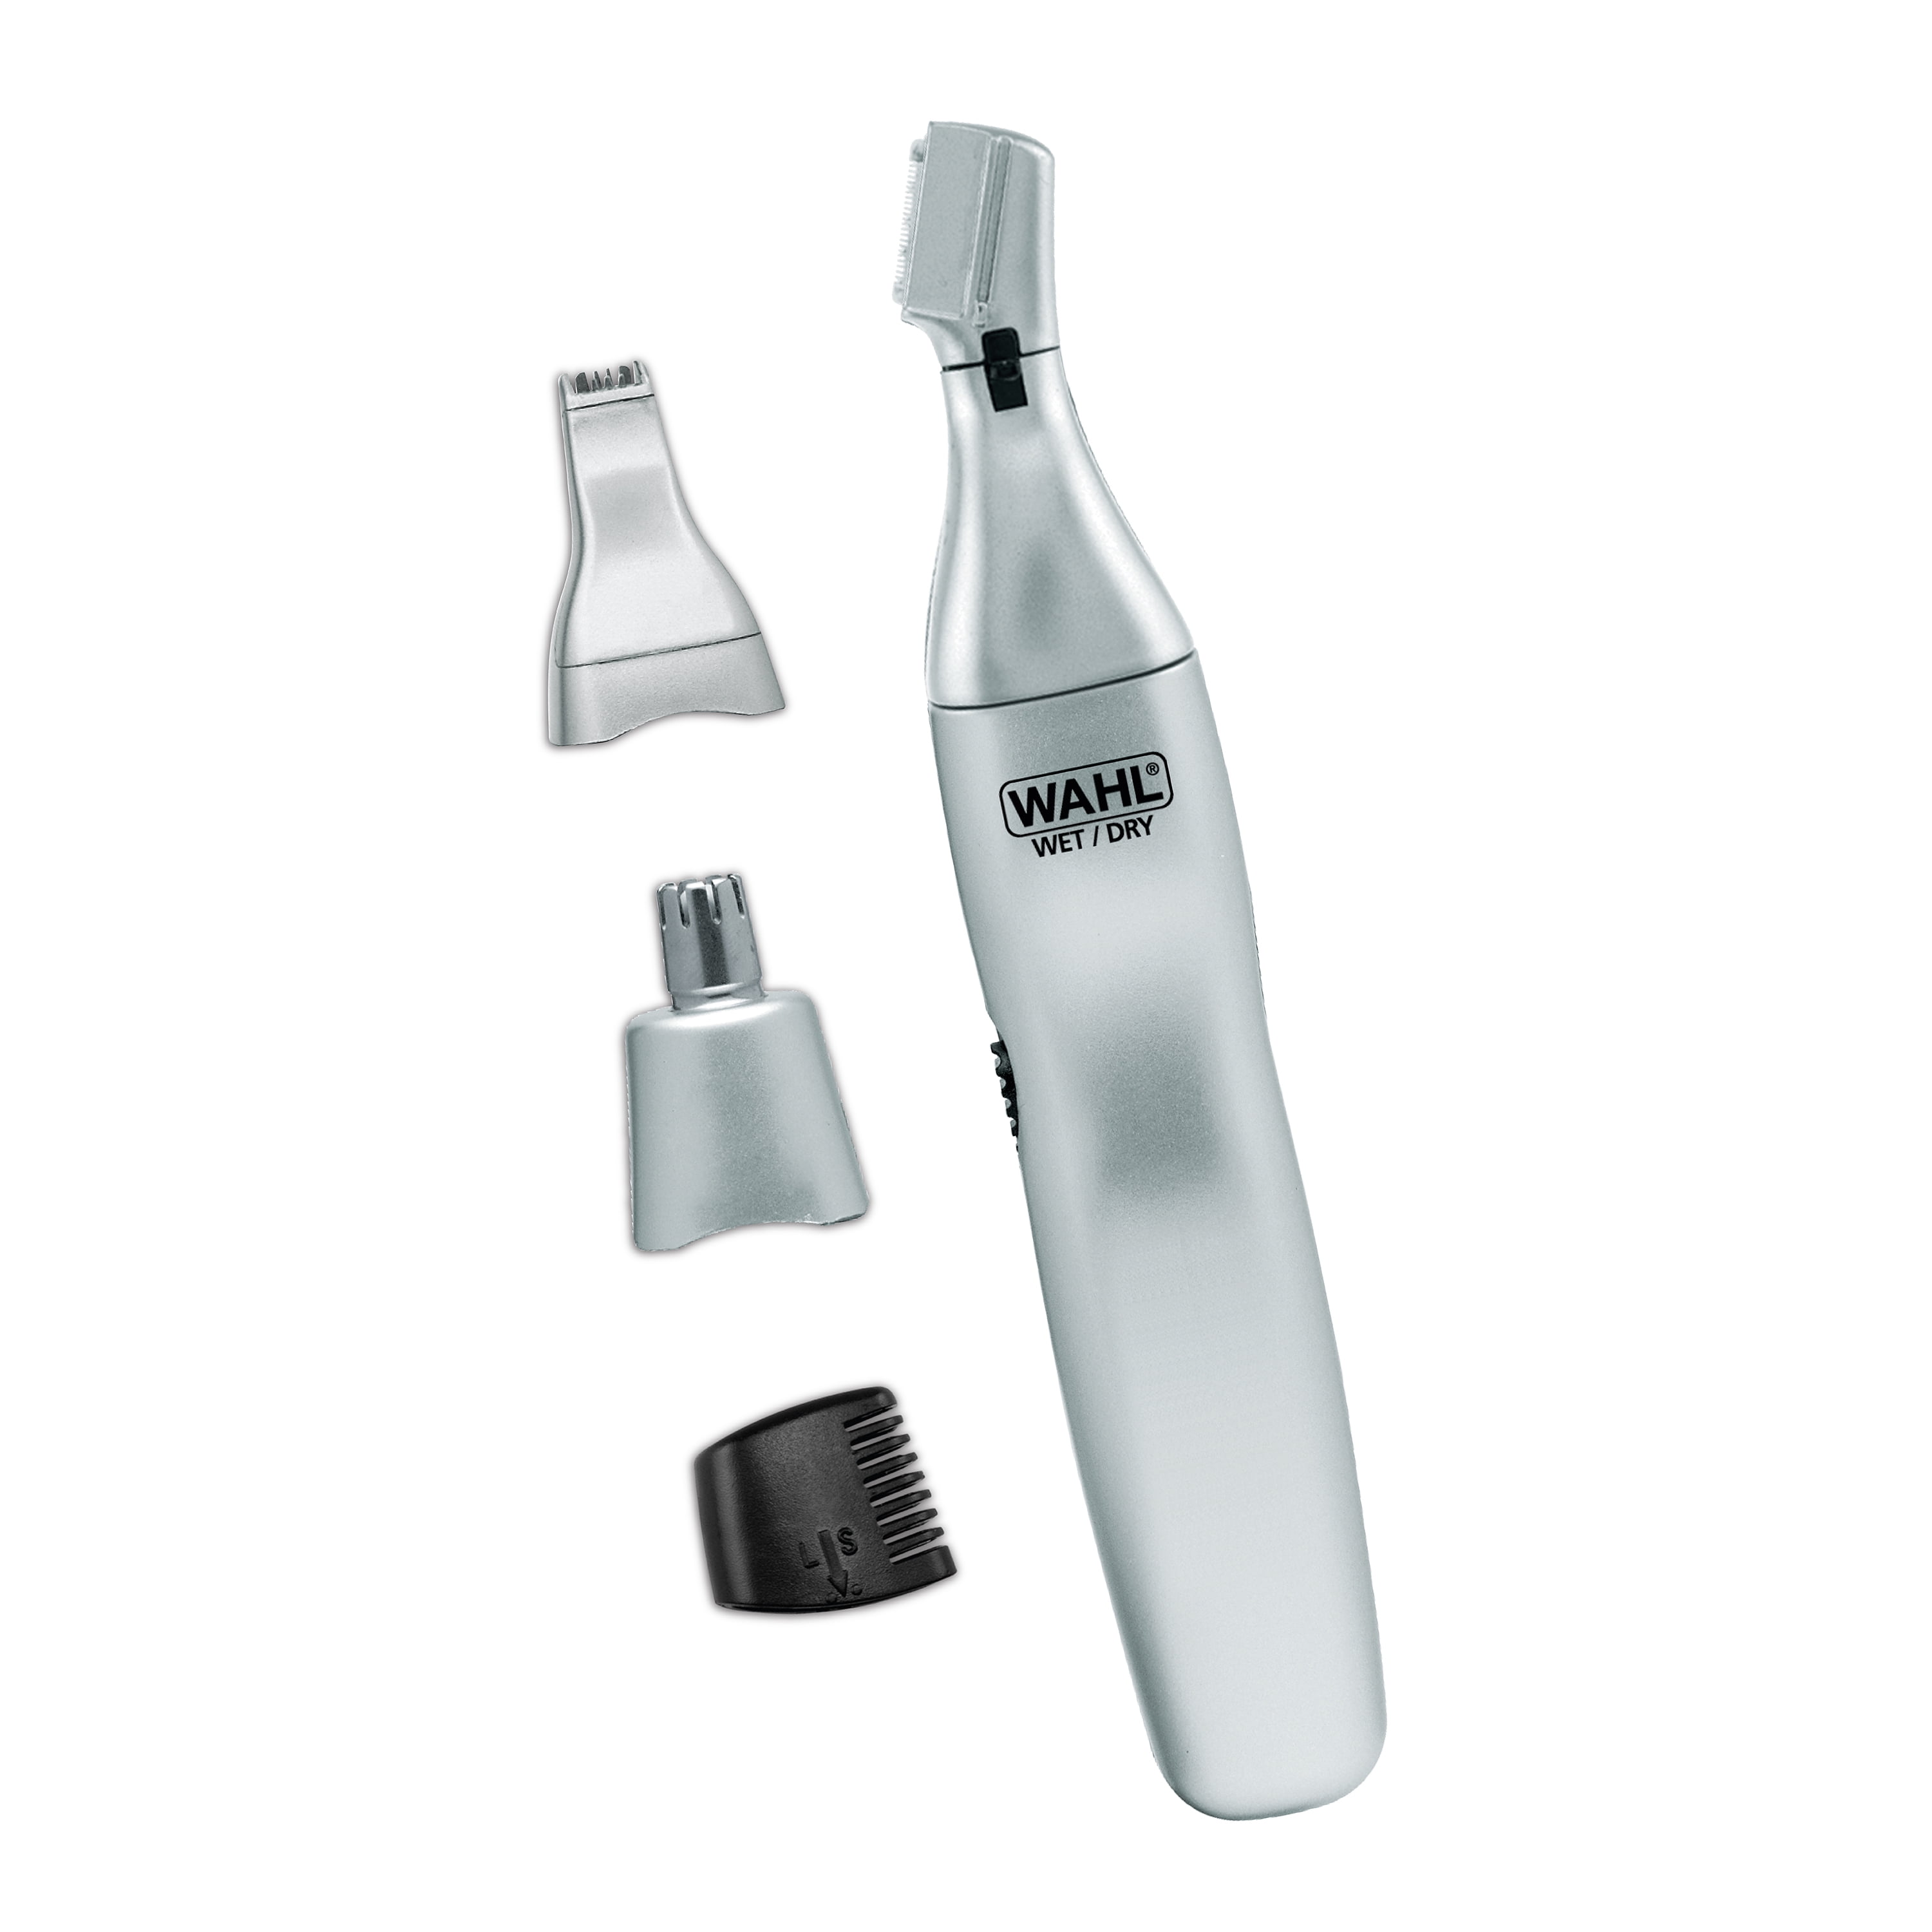 Wahl Clipper - Ear, Nose & Brow 3-in-1 Personal Trimmer. Wet/Dry for Easy, Precise and Hygienic Grooming! Model 5545-400 - Walmart.com